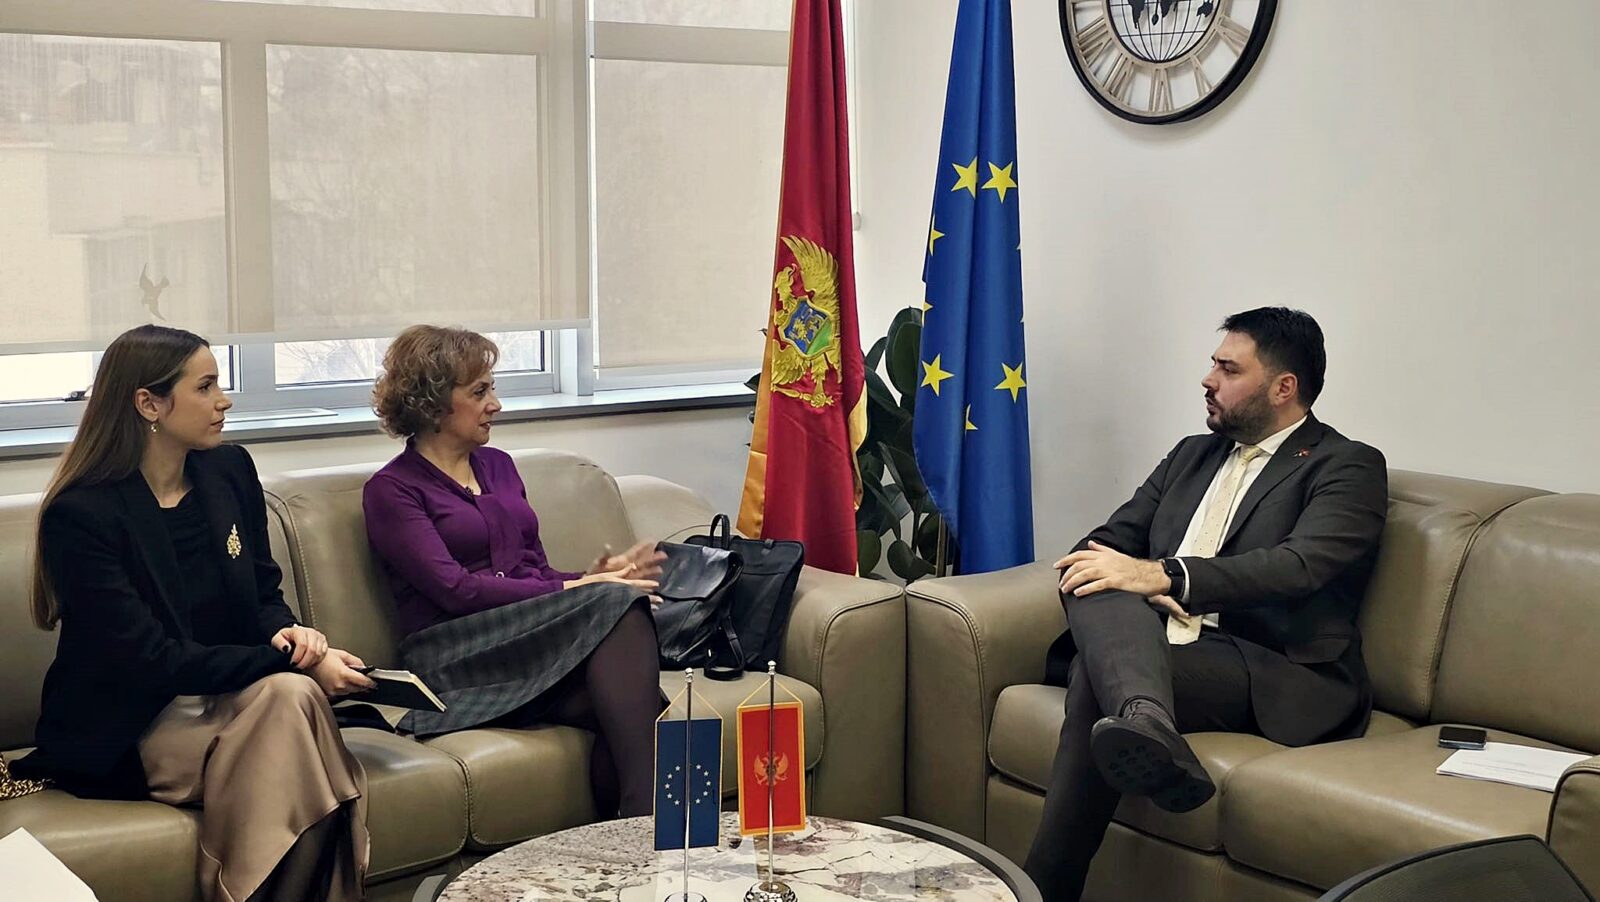 Mr. Martinović meets AmCham members: Investors find Montenegro enticing because businesses have a say in shaping the country’s laws and policies